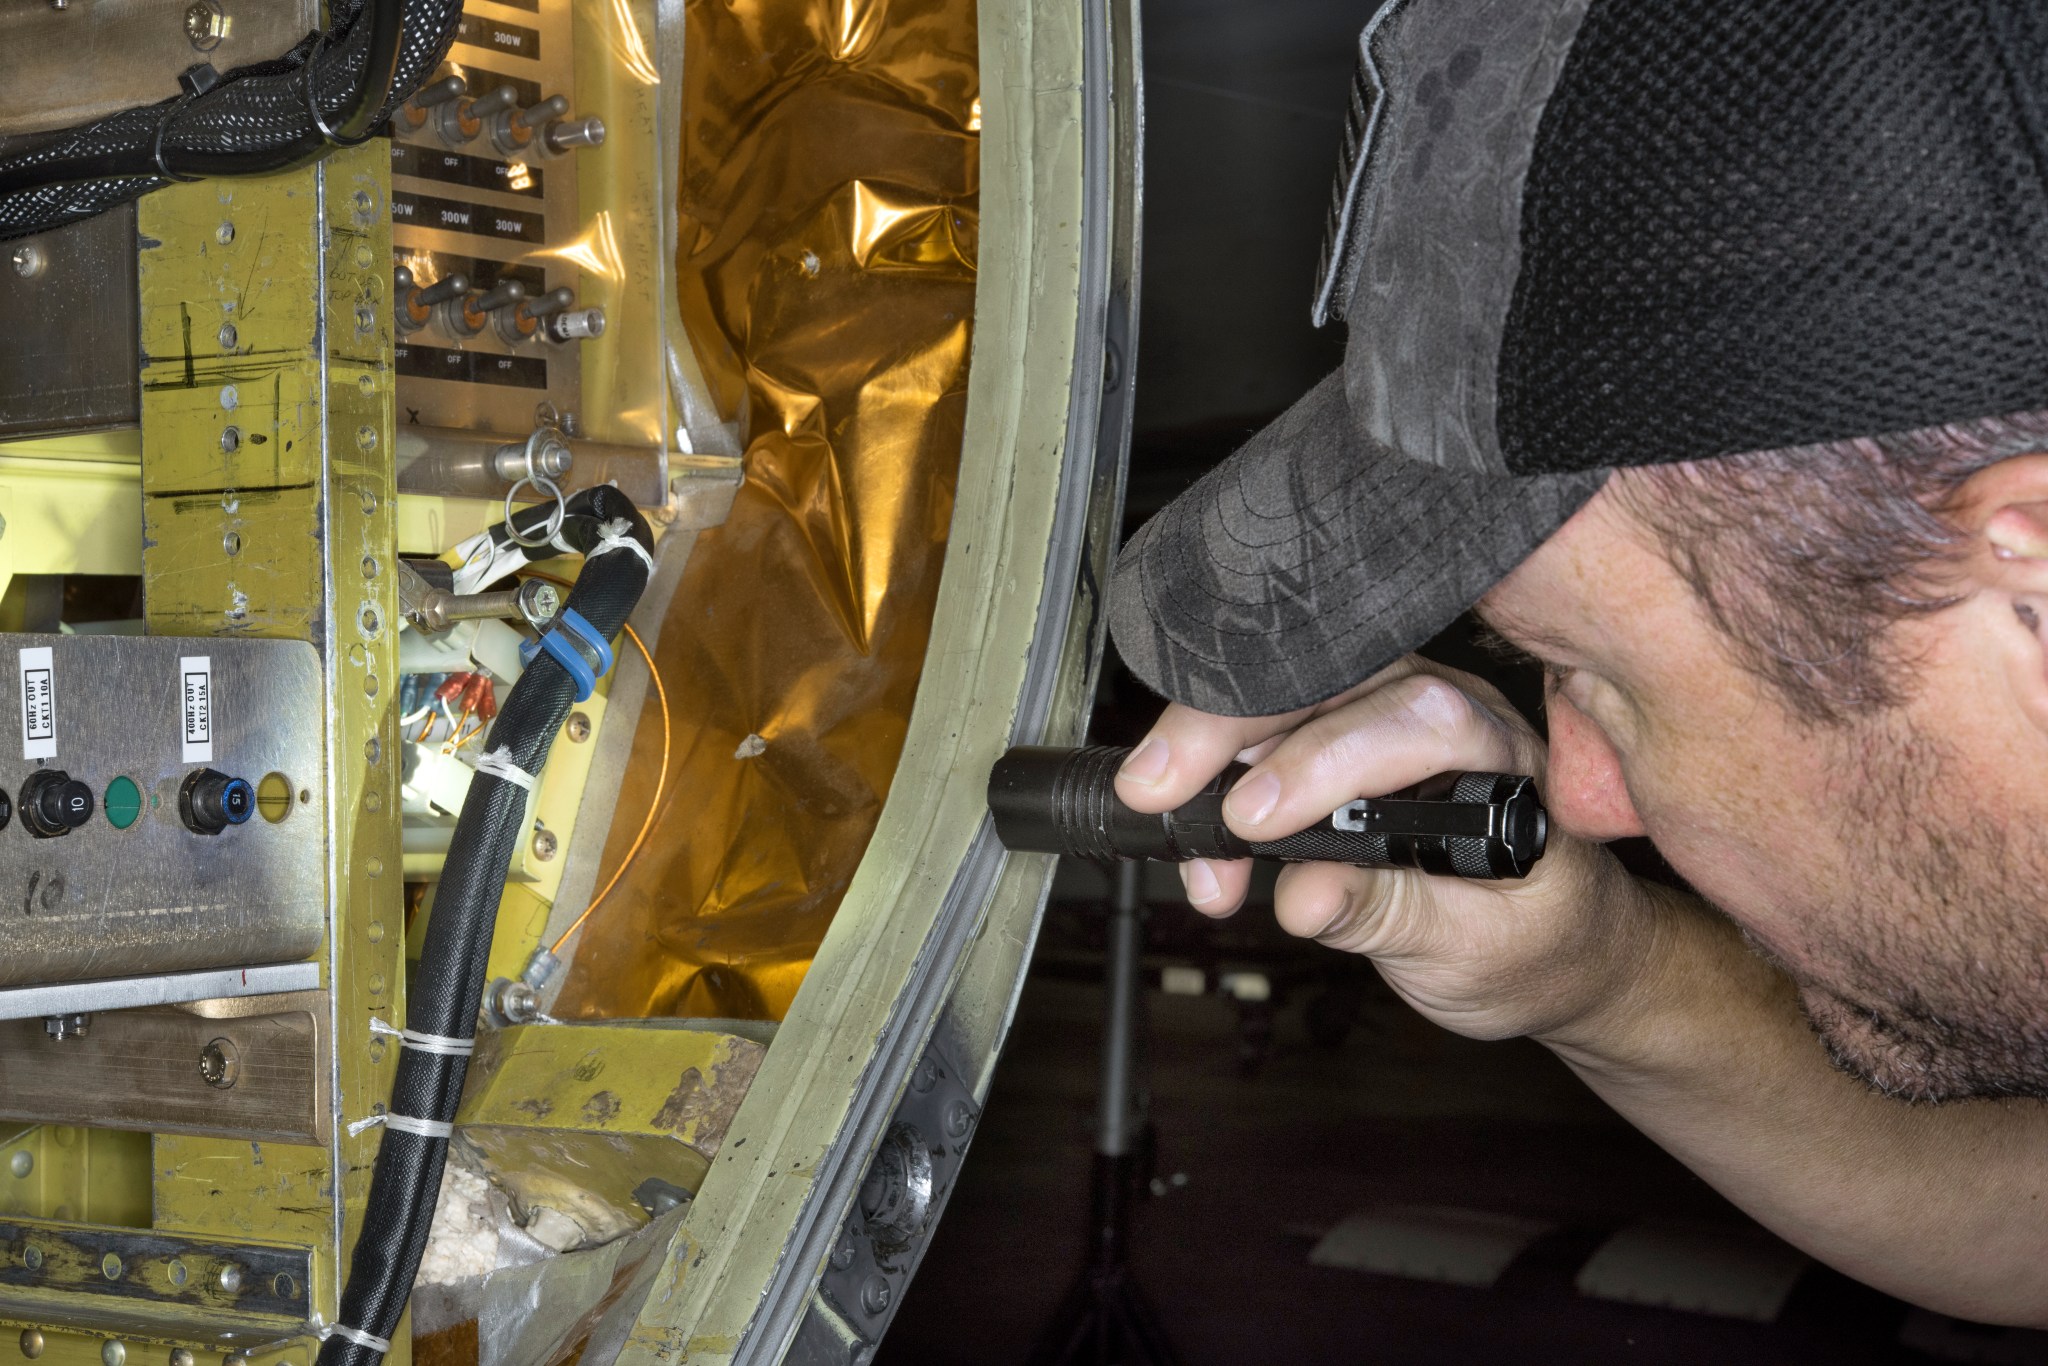 A crew member uses a small flashlight to inspect instrumentation.